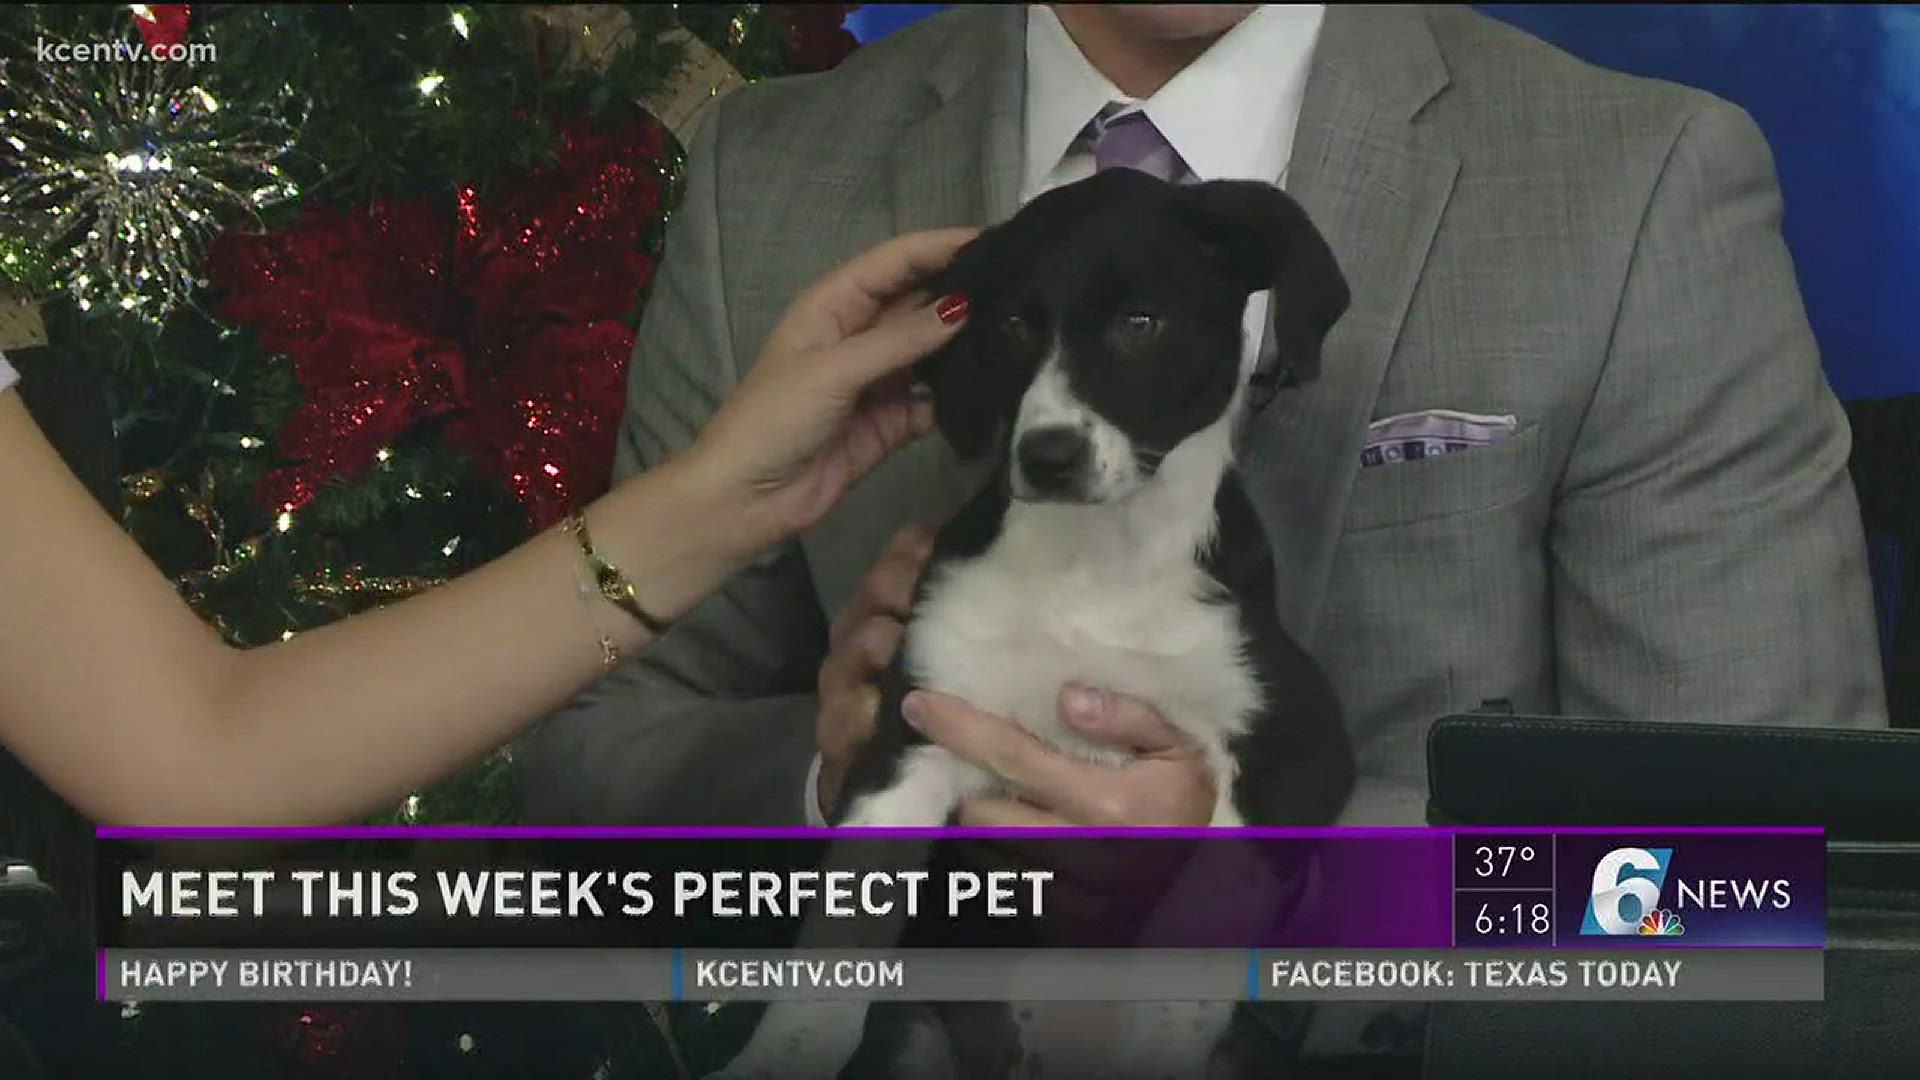 Adopt Patti from the Humane Society of Central Texas.